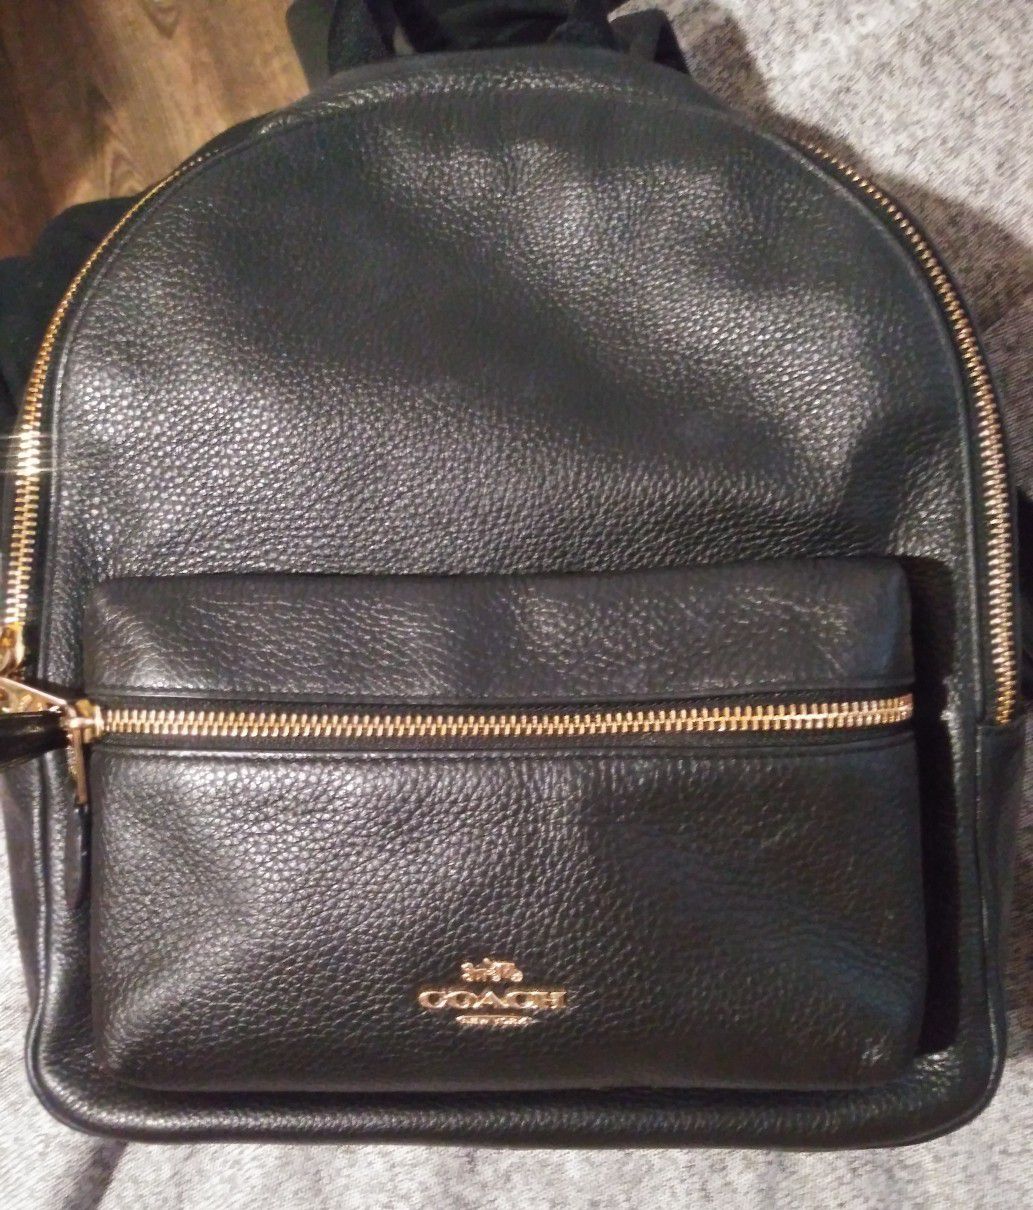 Authentic Charlie black leather Coach backpack. Black/Gold. Good condition.